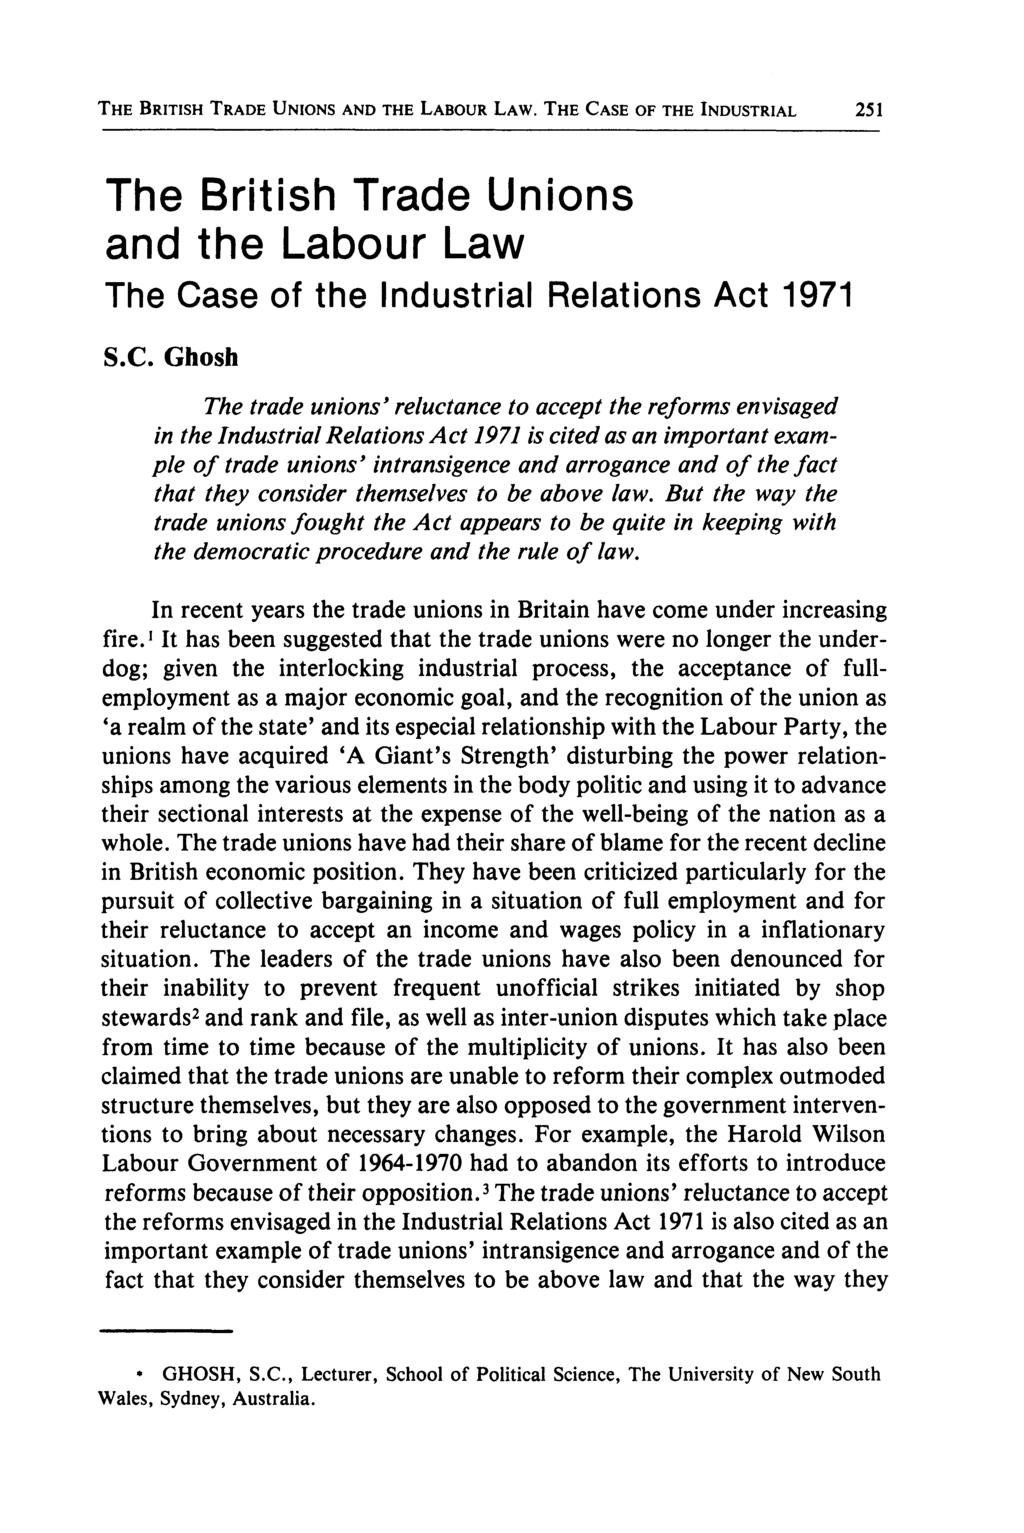 THE BRITISH TRADE UNIONS AND THE LABOUR LAW. THE CA